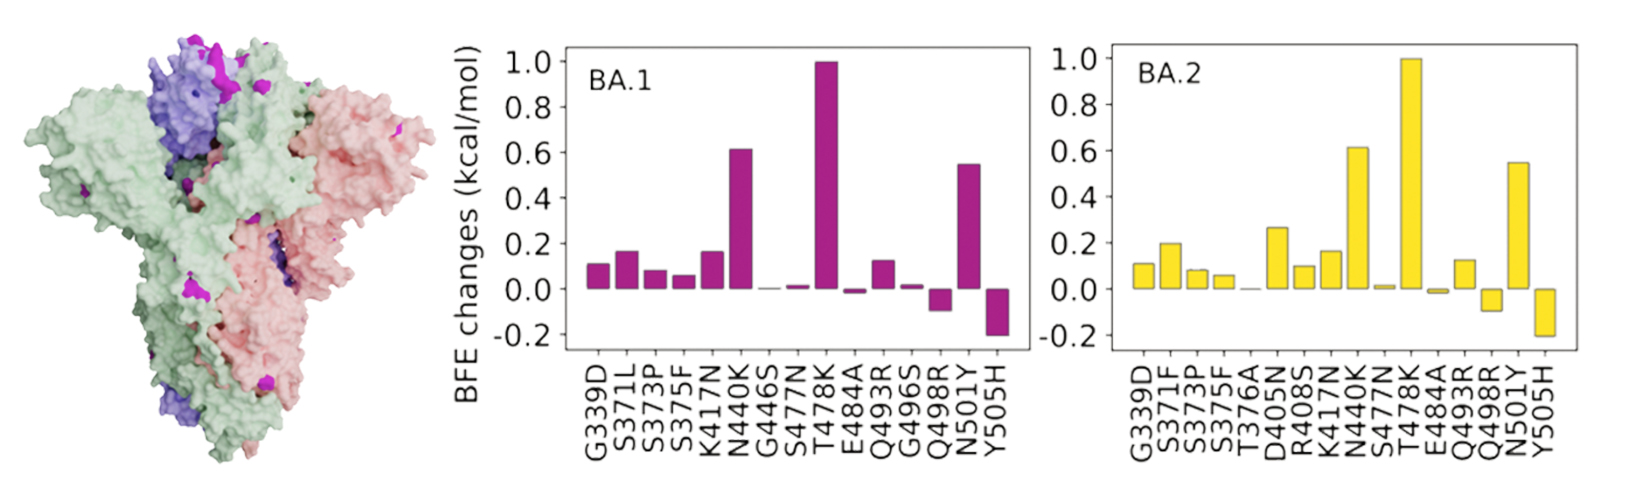 A scientific figure has three panels aligned horizontally. On the far left, a computer-generated image shows the coronavirus’s spike protein as a lumpy, T-shaped collection of amino acids, color-coded in pastel shades of red, green and purple, and spotted with solid magenta regions, showing where omicron has mutated. To the right are two bar graphs showing how the binding free energy, or BFE, has changed for those regions as a result of the mutations for omicron variants BA.1 (shown as the center panel) and BA.2 (the right-most panel). Each graph has 15 bars, each one corresponding to a given region of the spike protein, which are designated with alphanumeric names such as G330D, S271F and K417N. The different shapes of the two bar graphs help reveal how the variants behave differently.